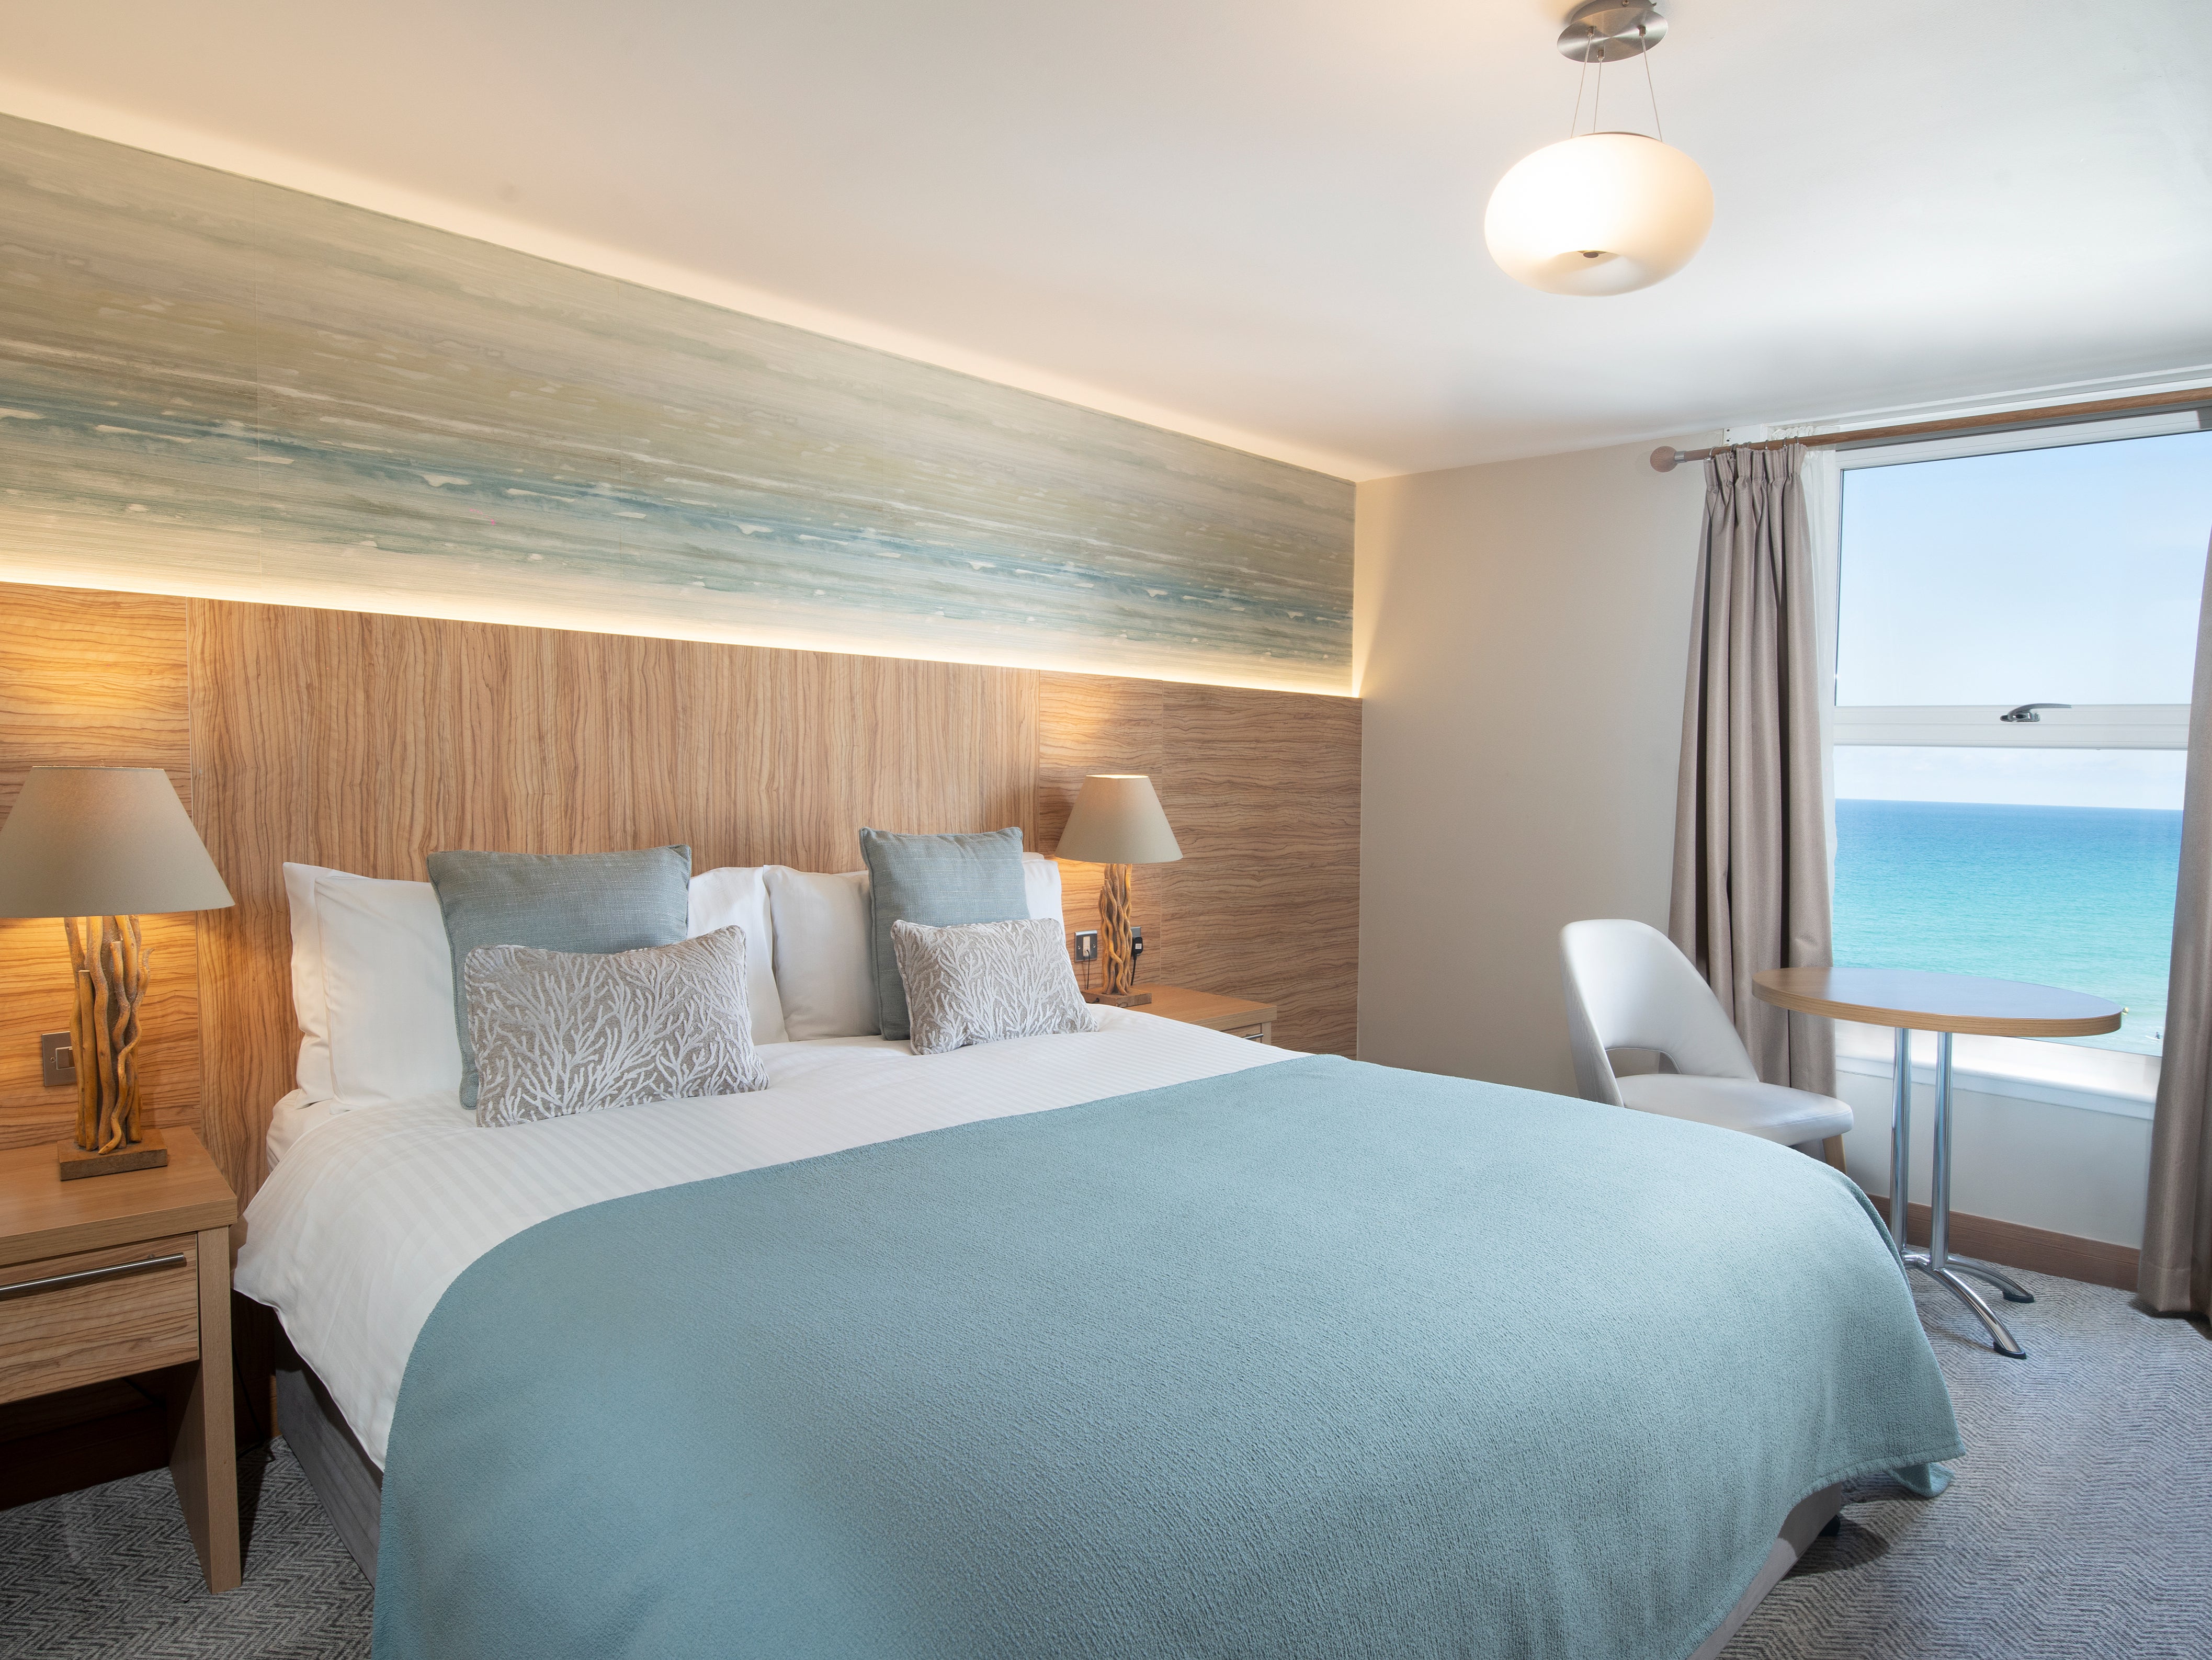 Soak up the stunning view of Fistral Beach